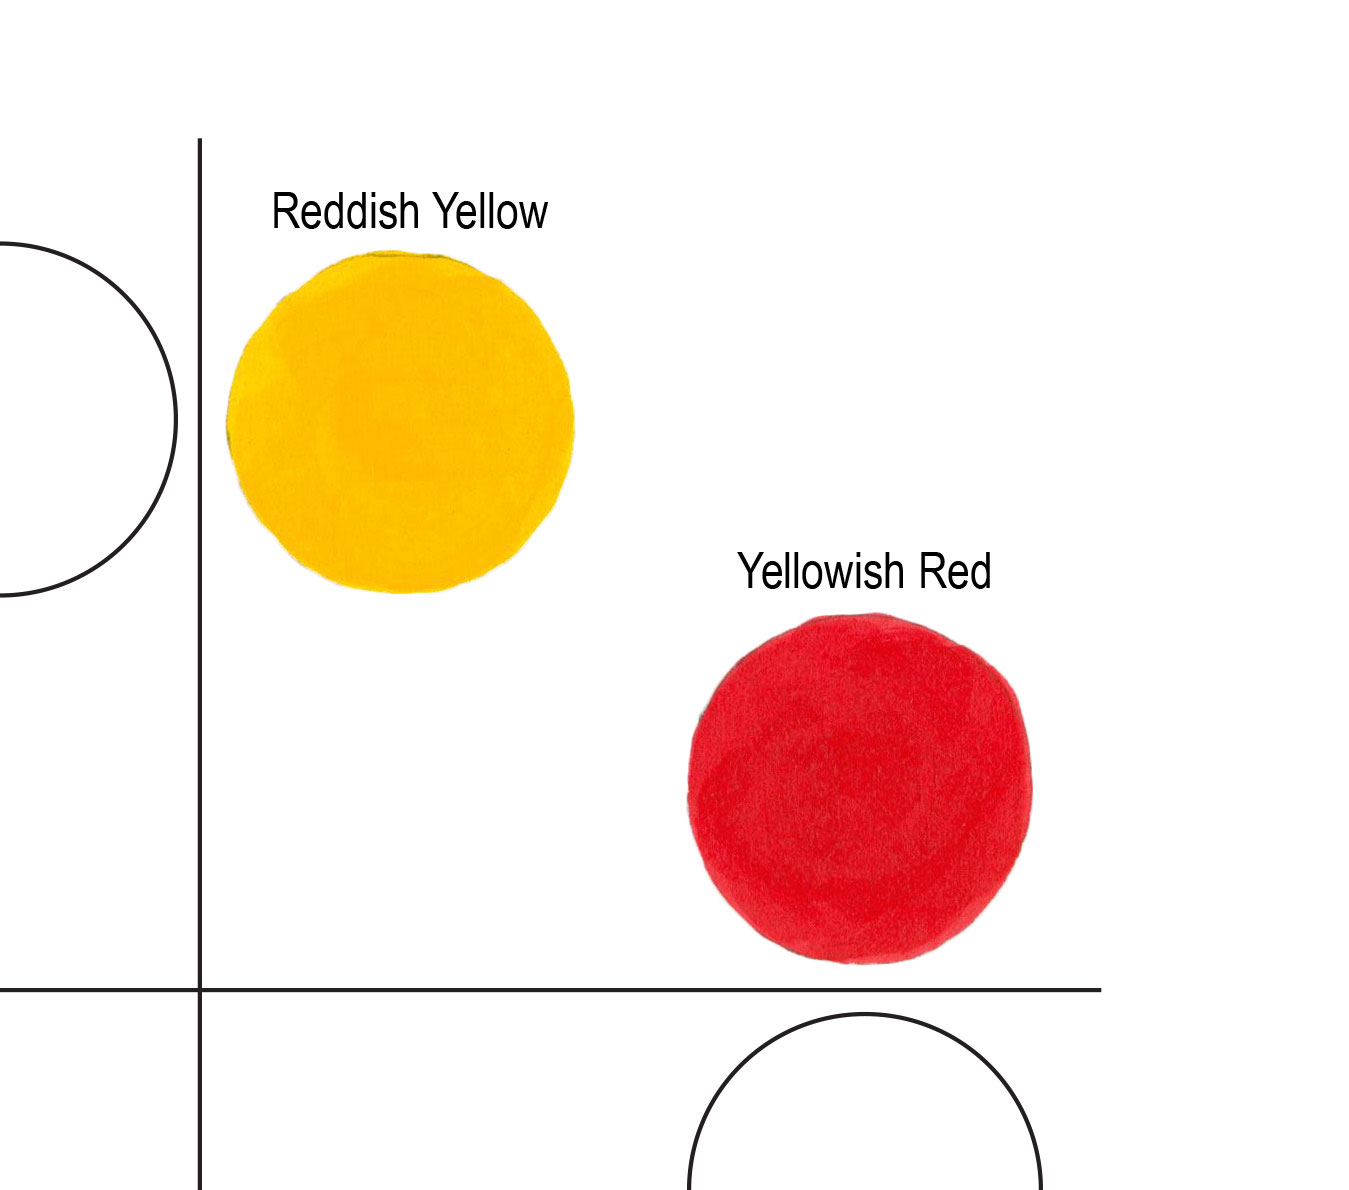 Figure 4: The Yellow Red Quadrant contains a reddish yellow and yellowish red.